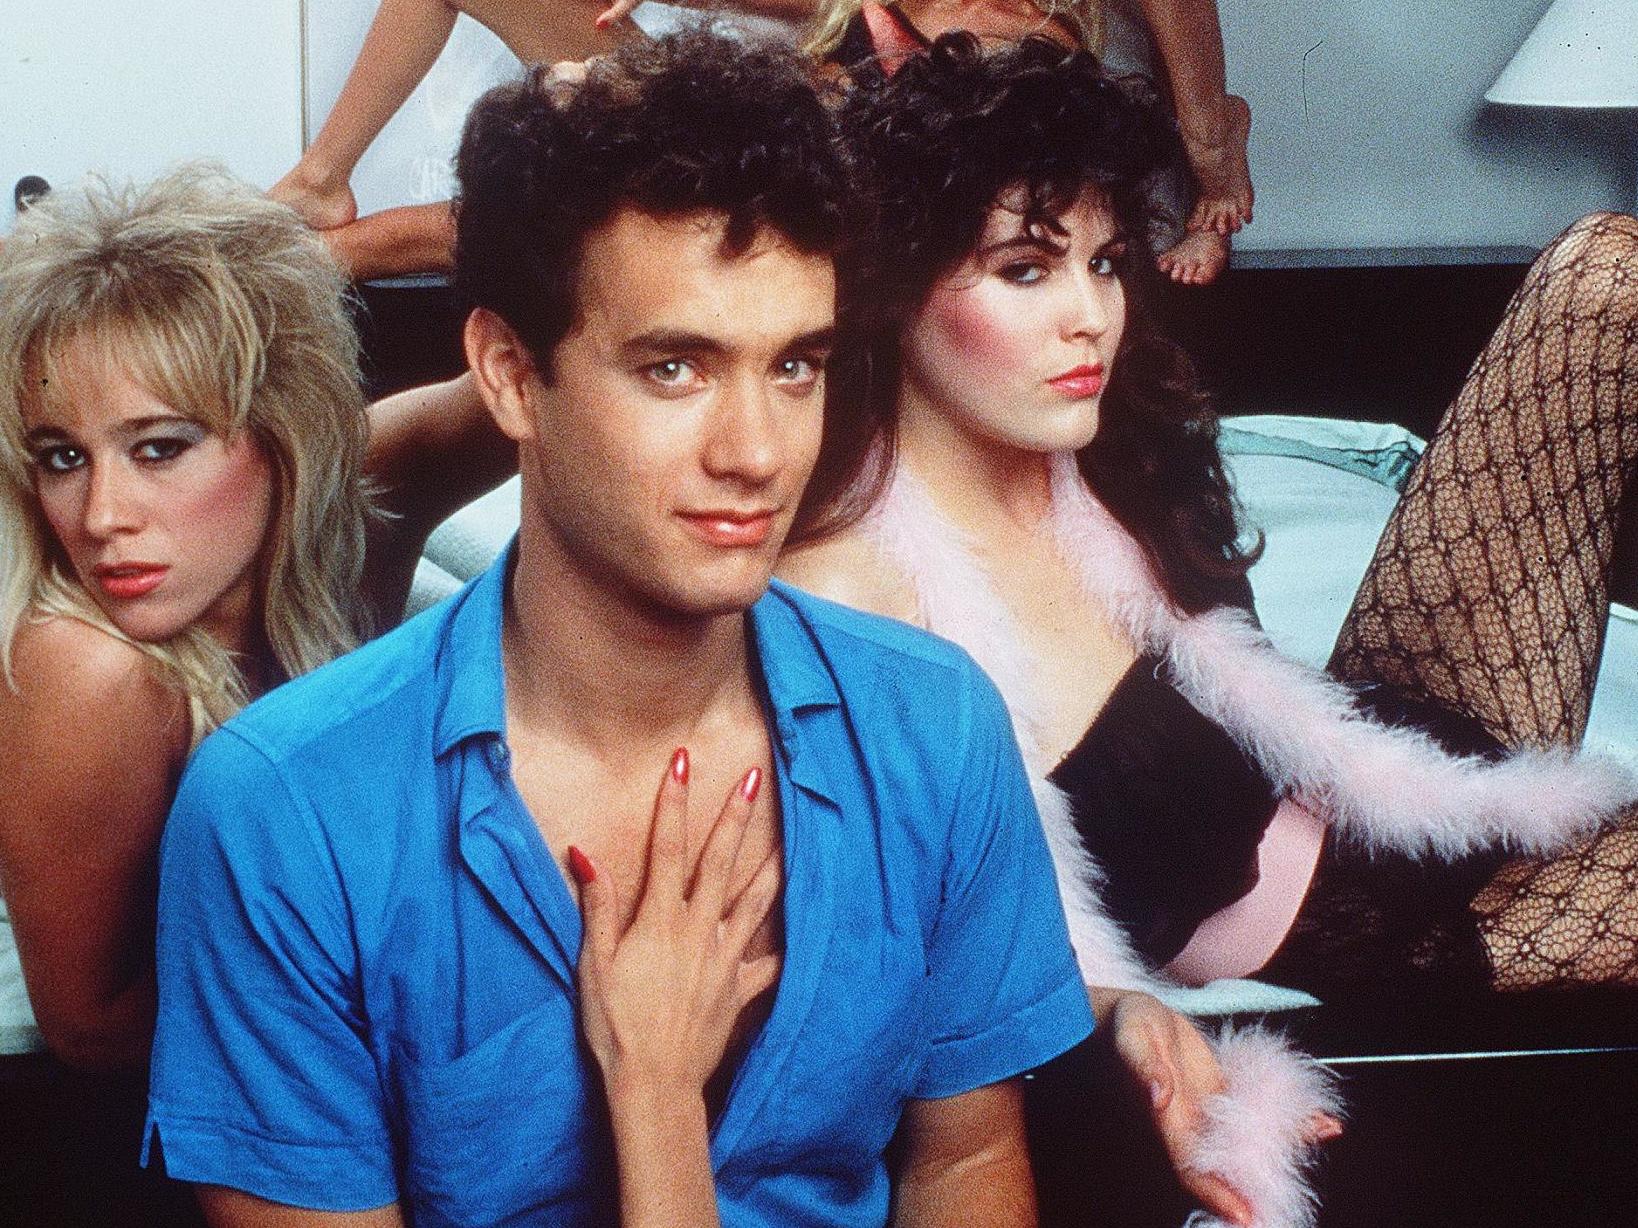 Determinedly low brow: Hanks in ‘Bachelor Party’ (1984)